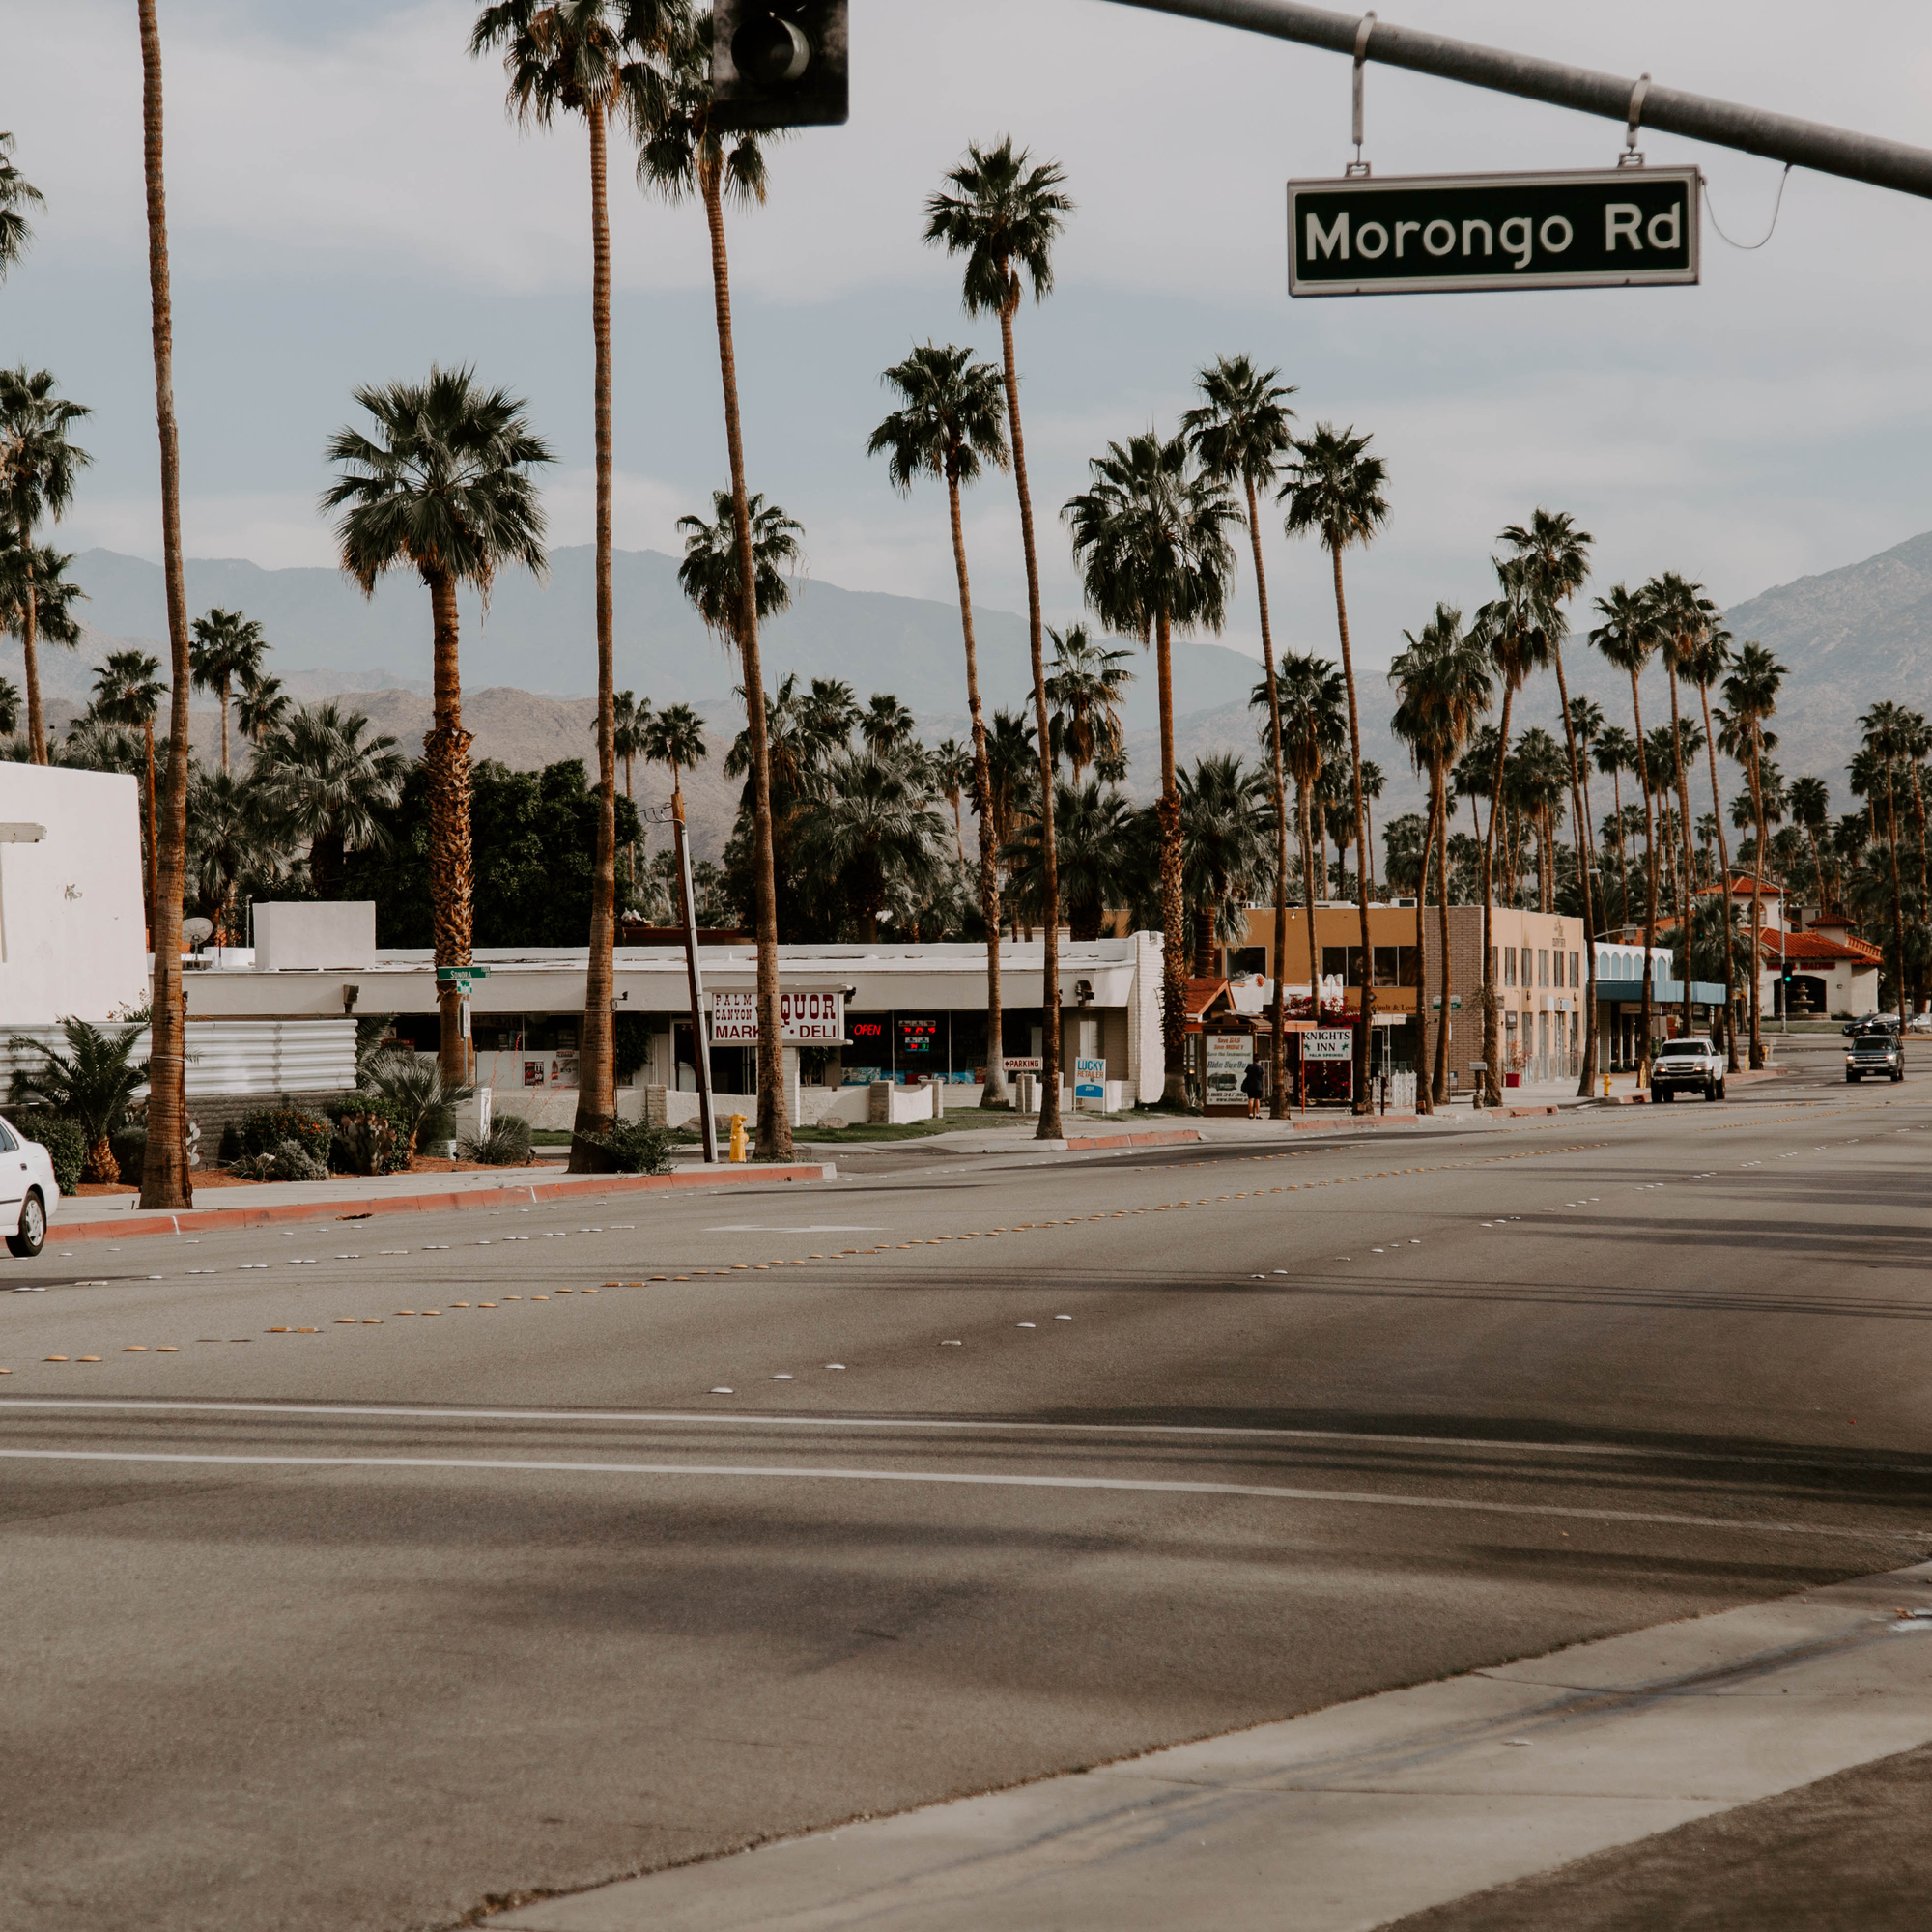 SCENES OF FAR: PALM SPRING STYLE